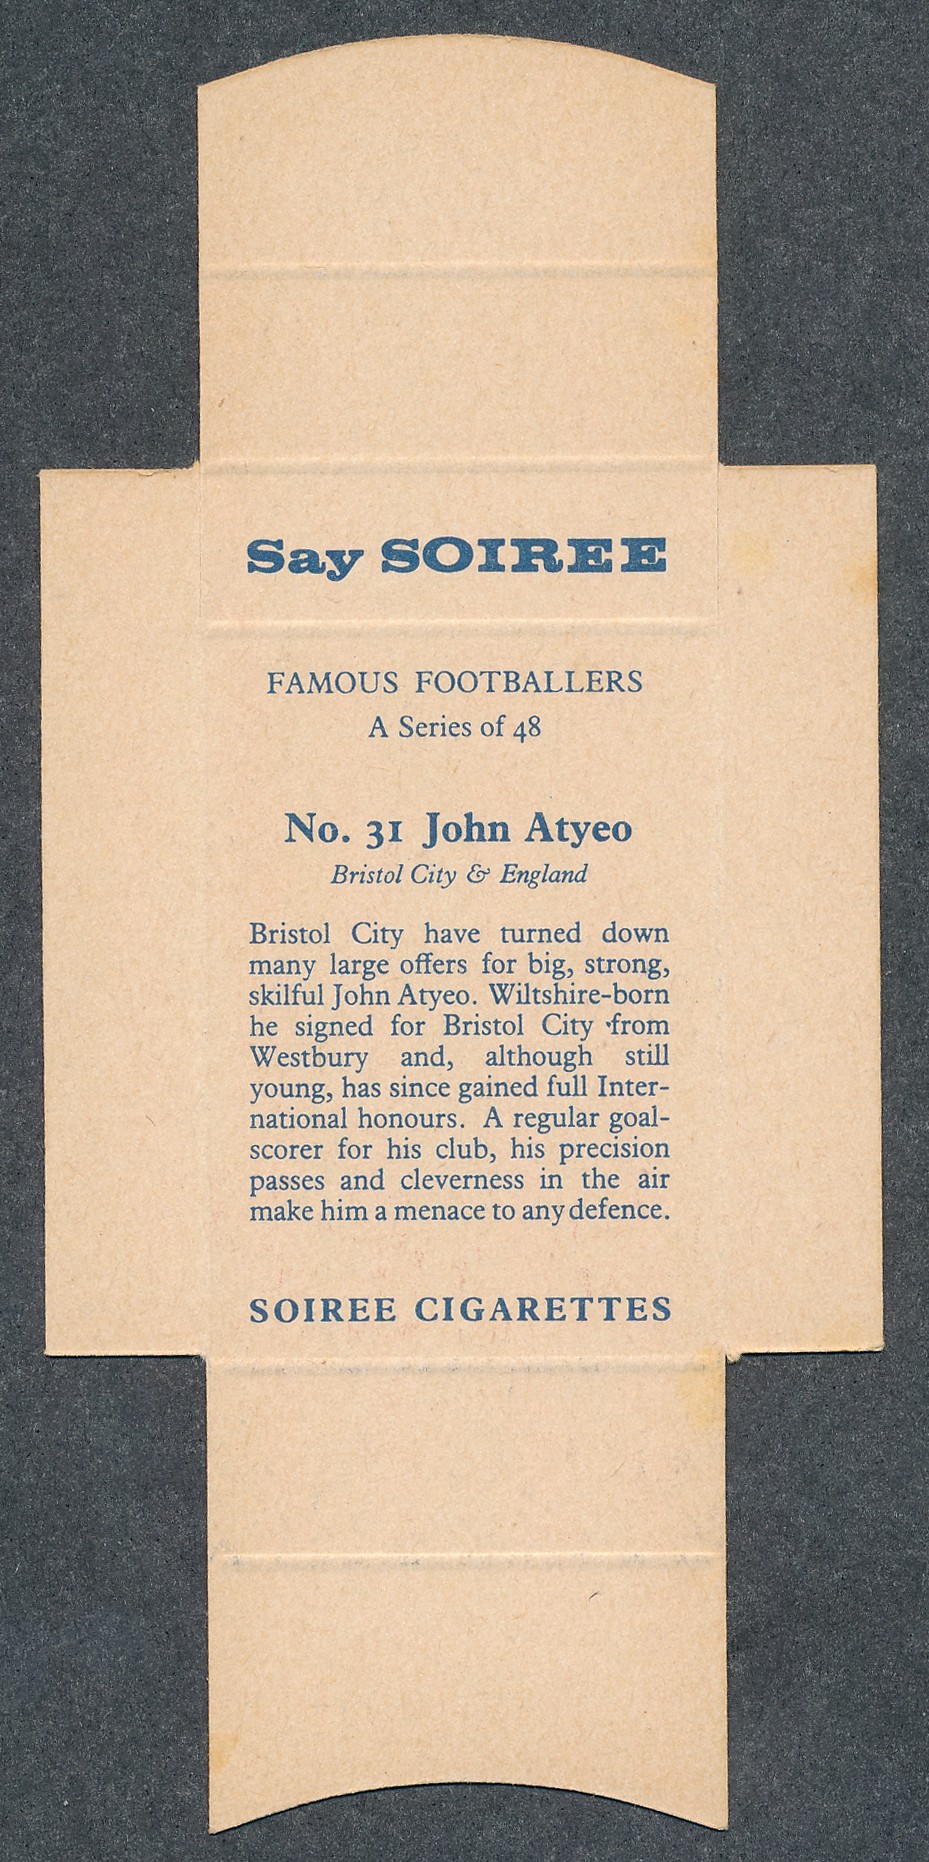 Soiree Cigarettes, Mauritius, Famous Footballers, uncut packet issue, No.31 John Atyeo, Bristol City - Image 2 of 2